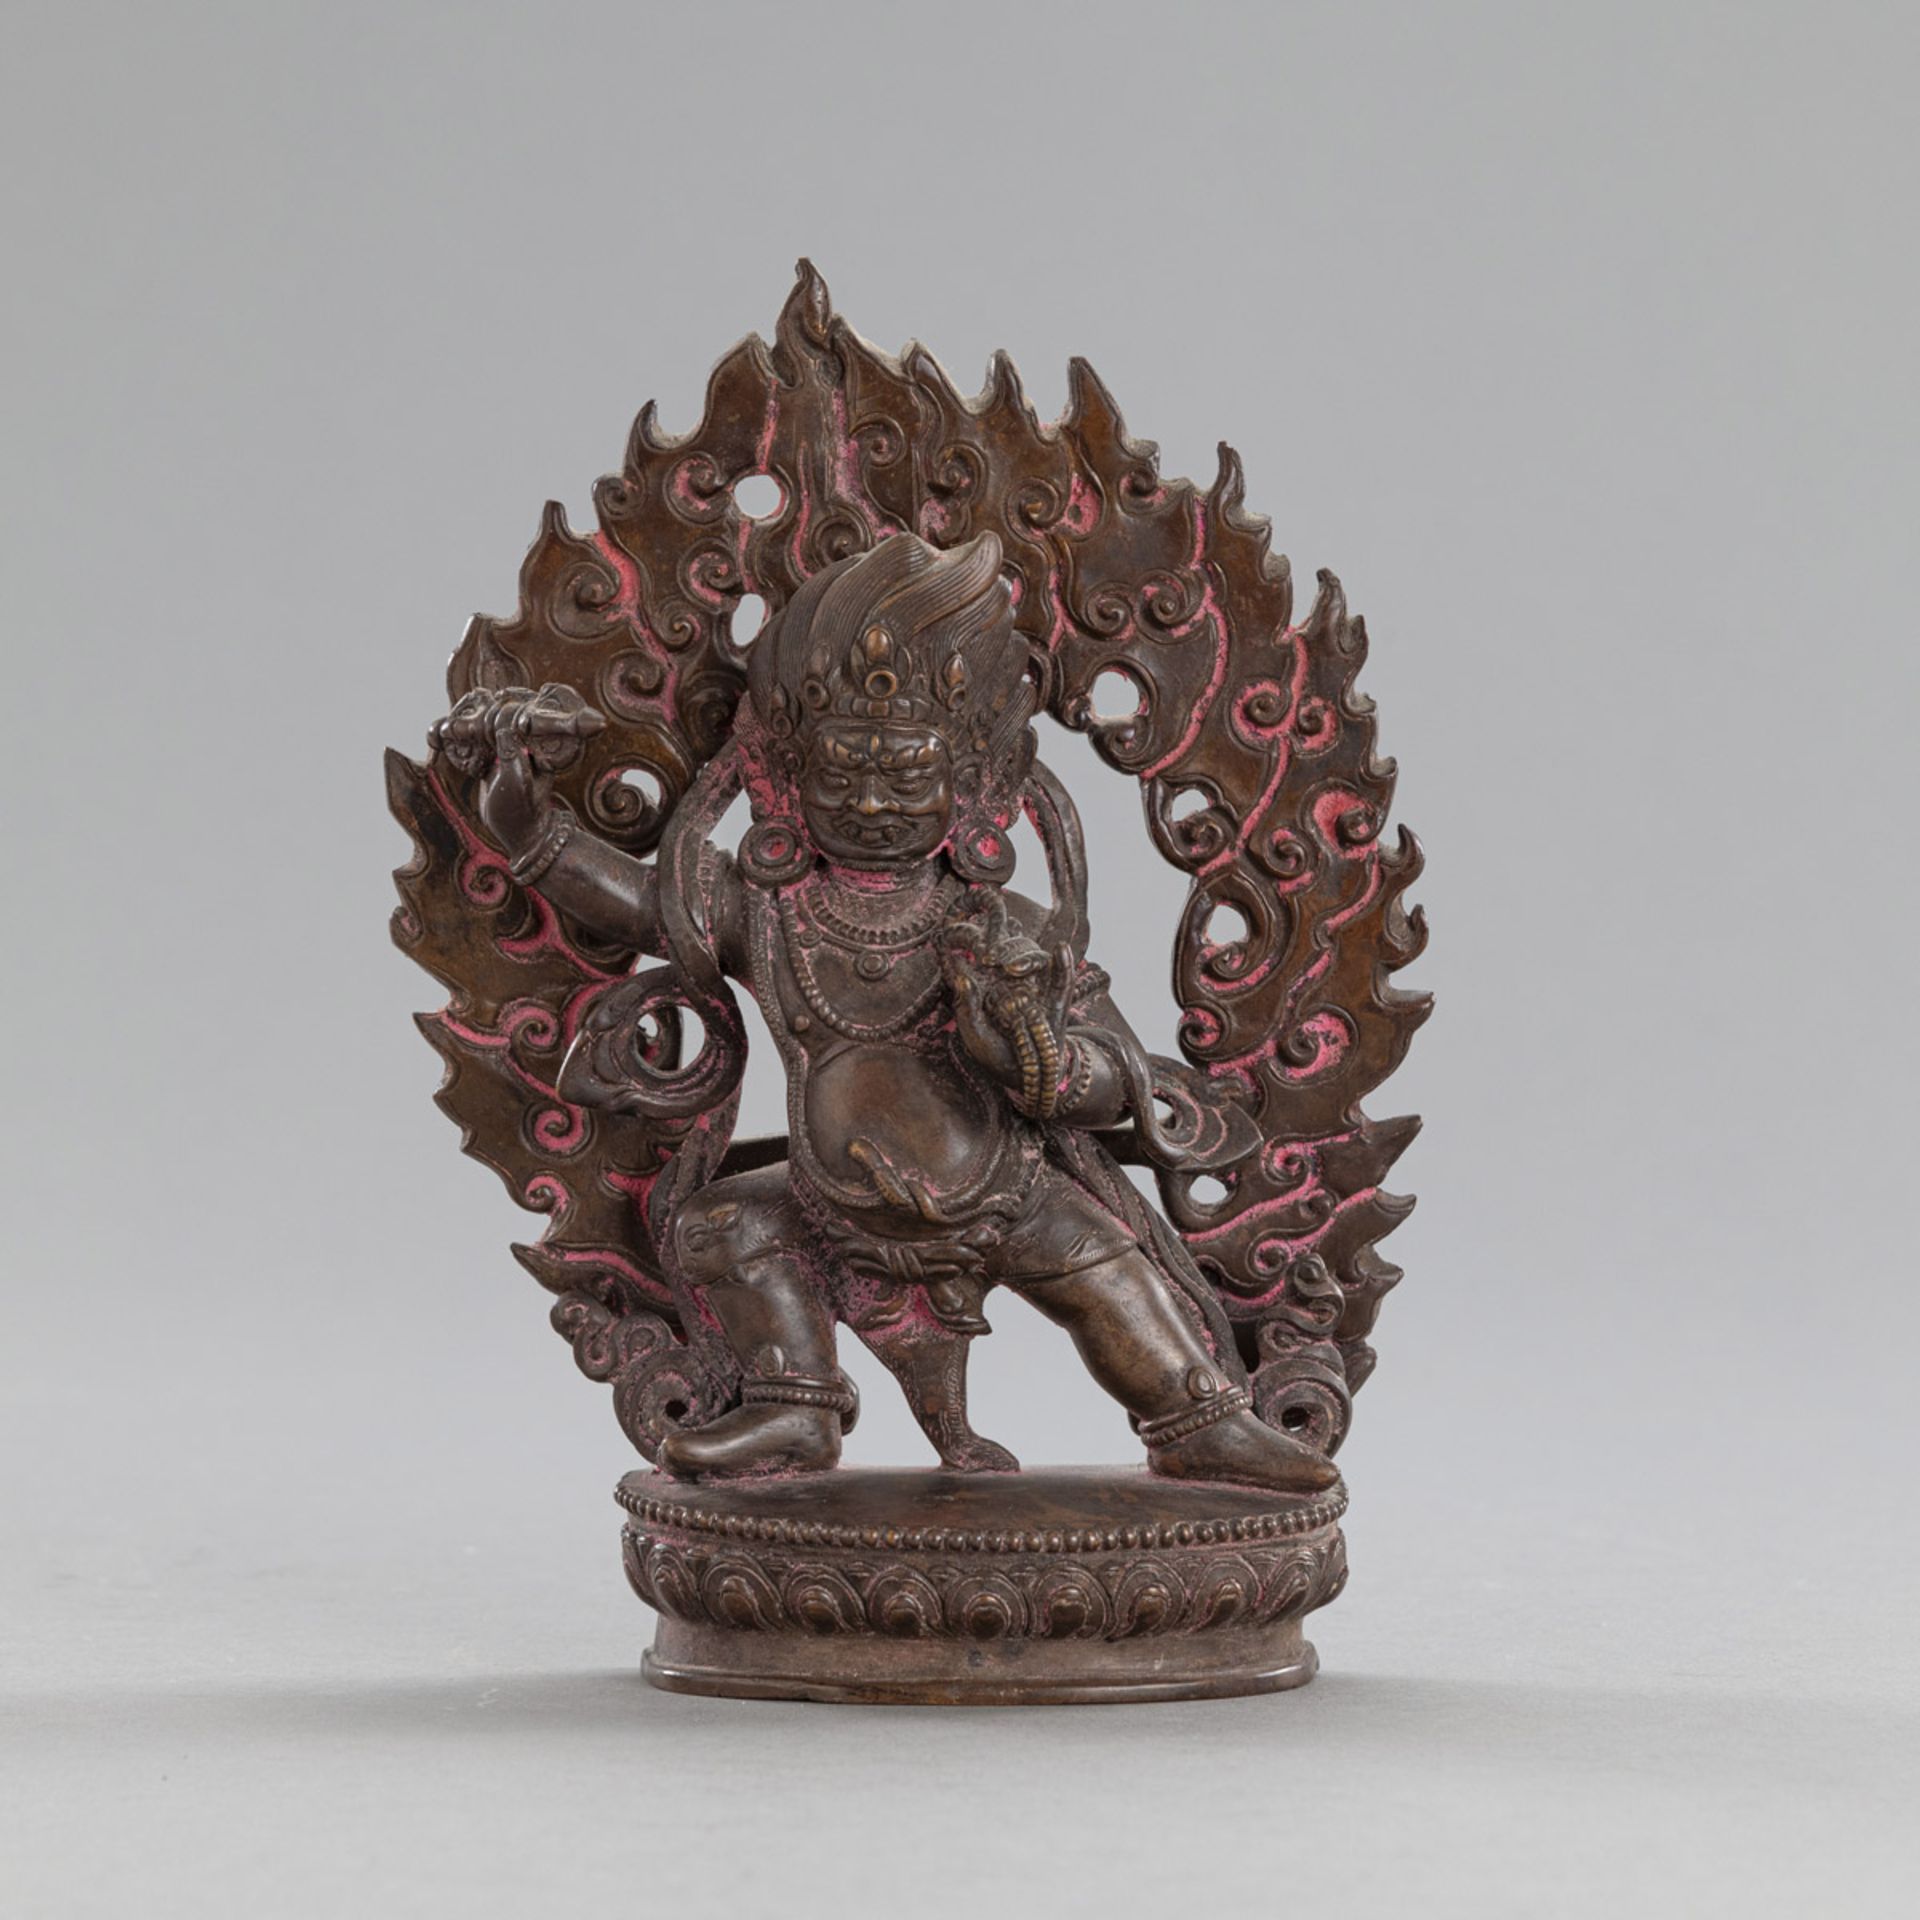 A BRONZE FIGURE OF VAJRAPANI WITH A FLAMING MANDORLA